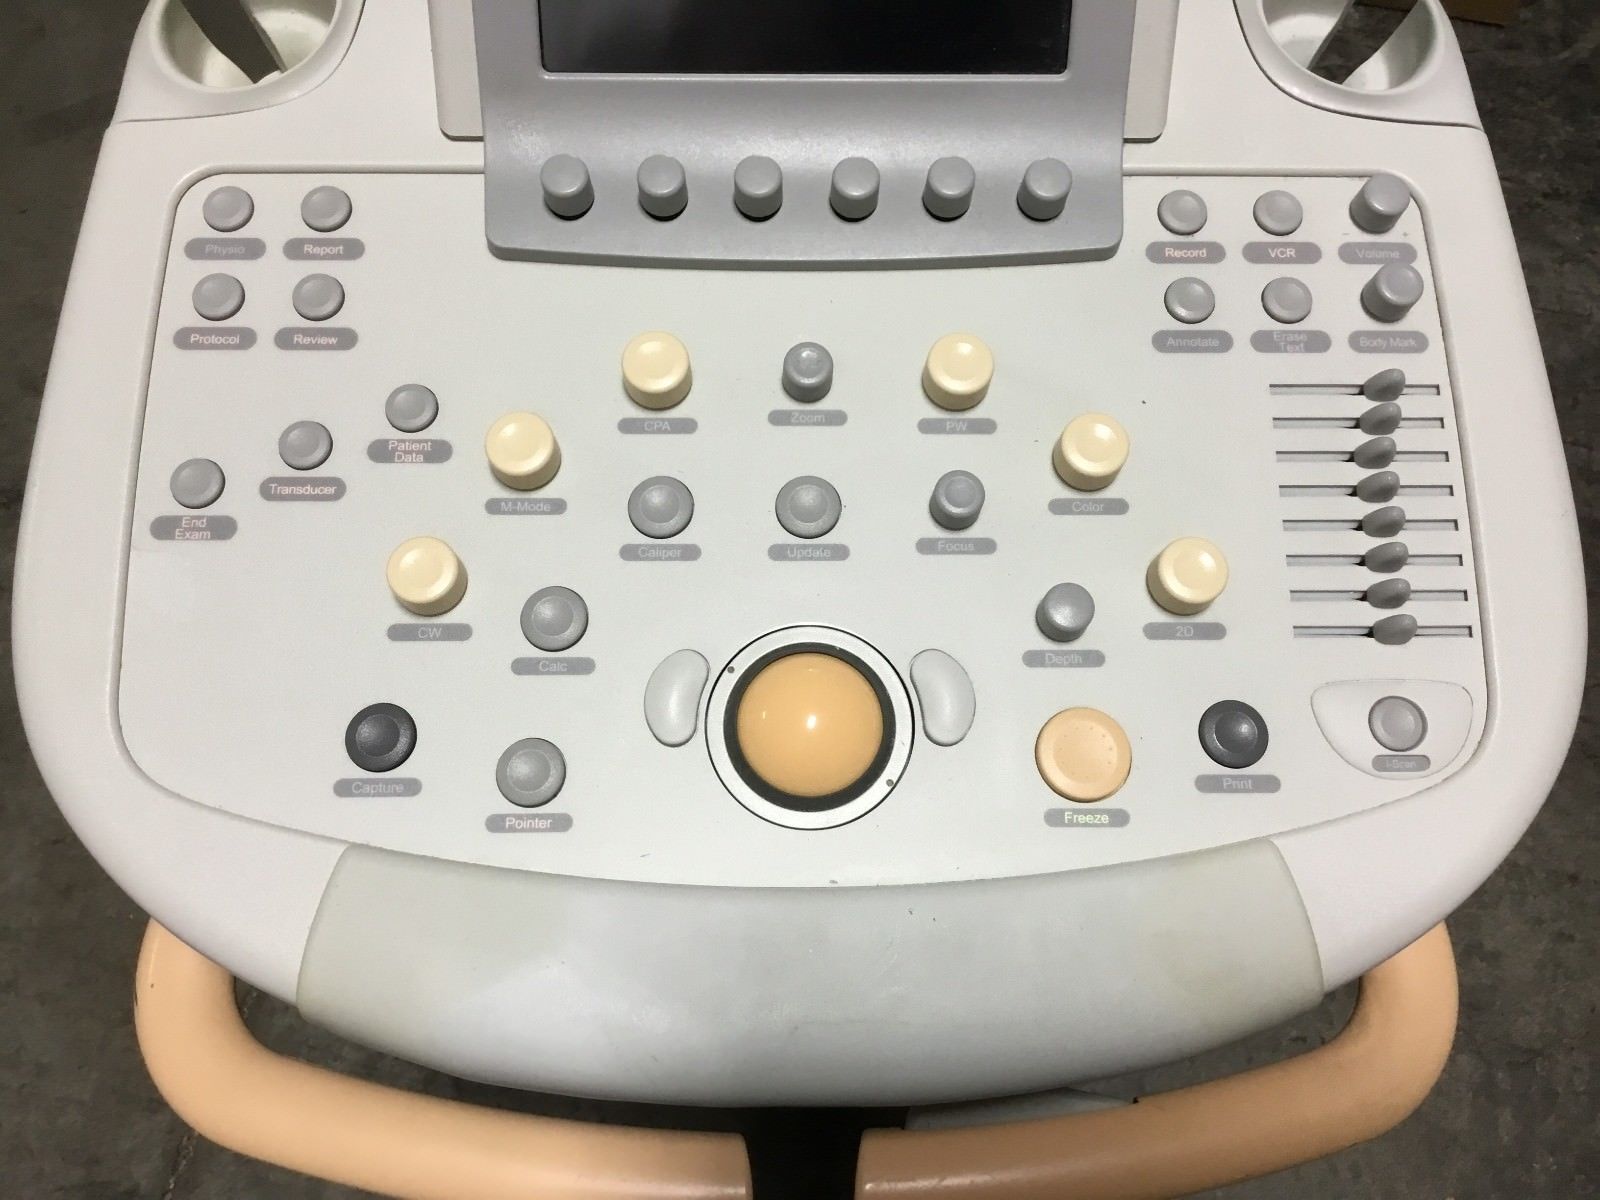 a close up of a medical device with buttons